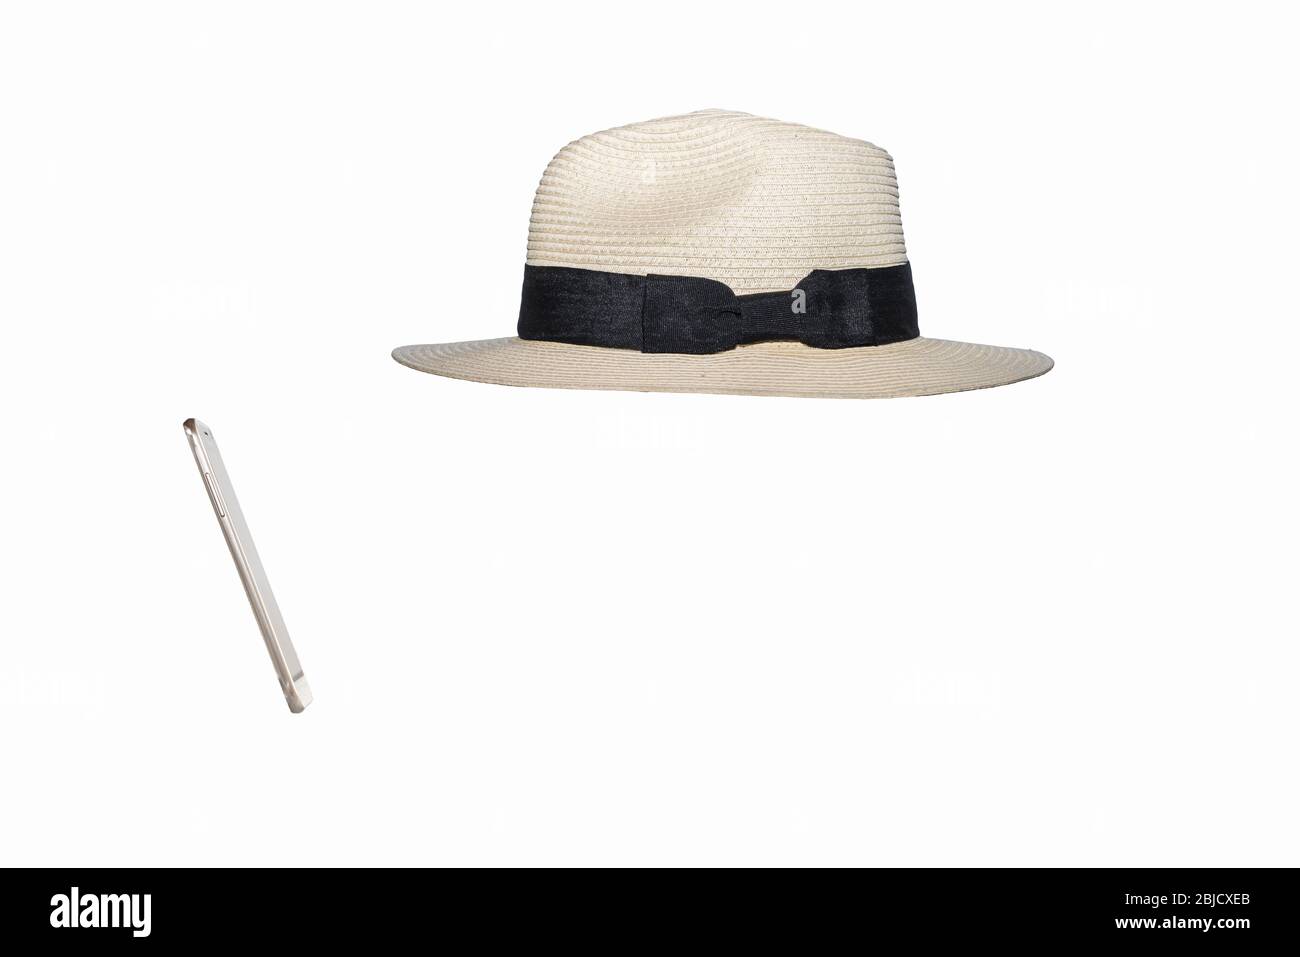 Panama hat, mobile phone against white background. Concept:  invisible man, Modern man, fashion, man of the world, absorbed, focussed, online. Stock Photo